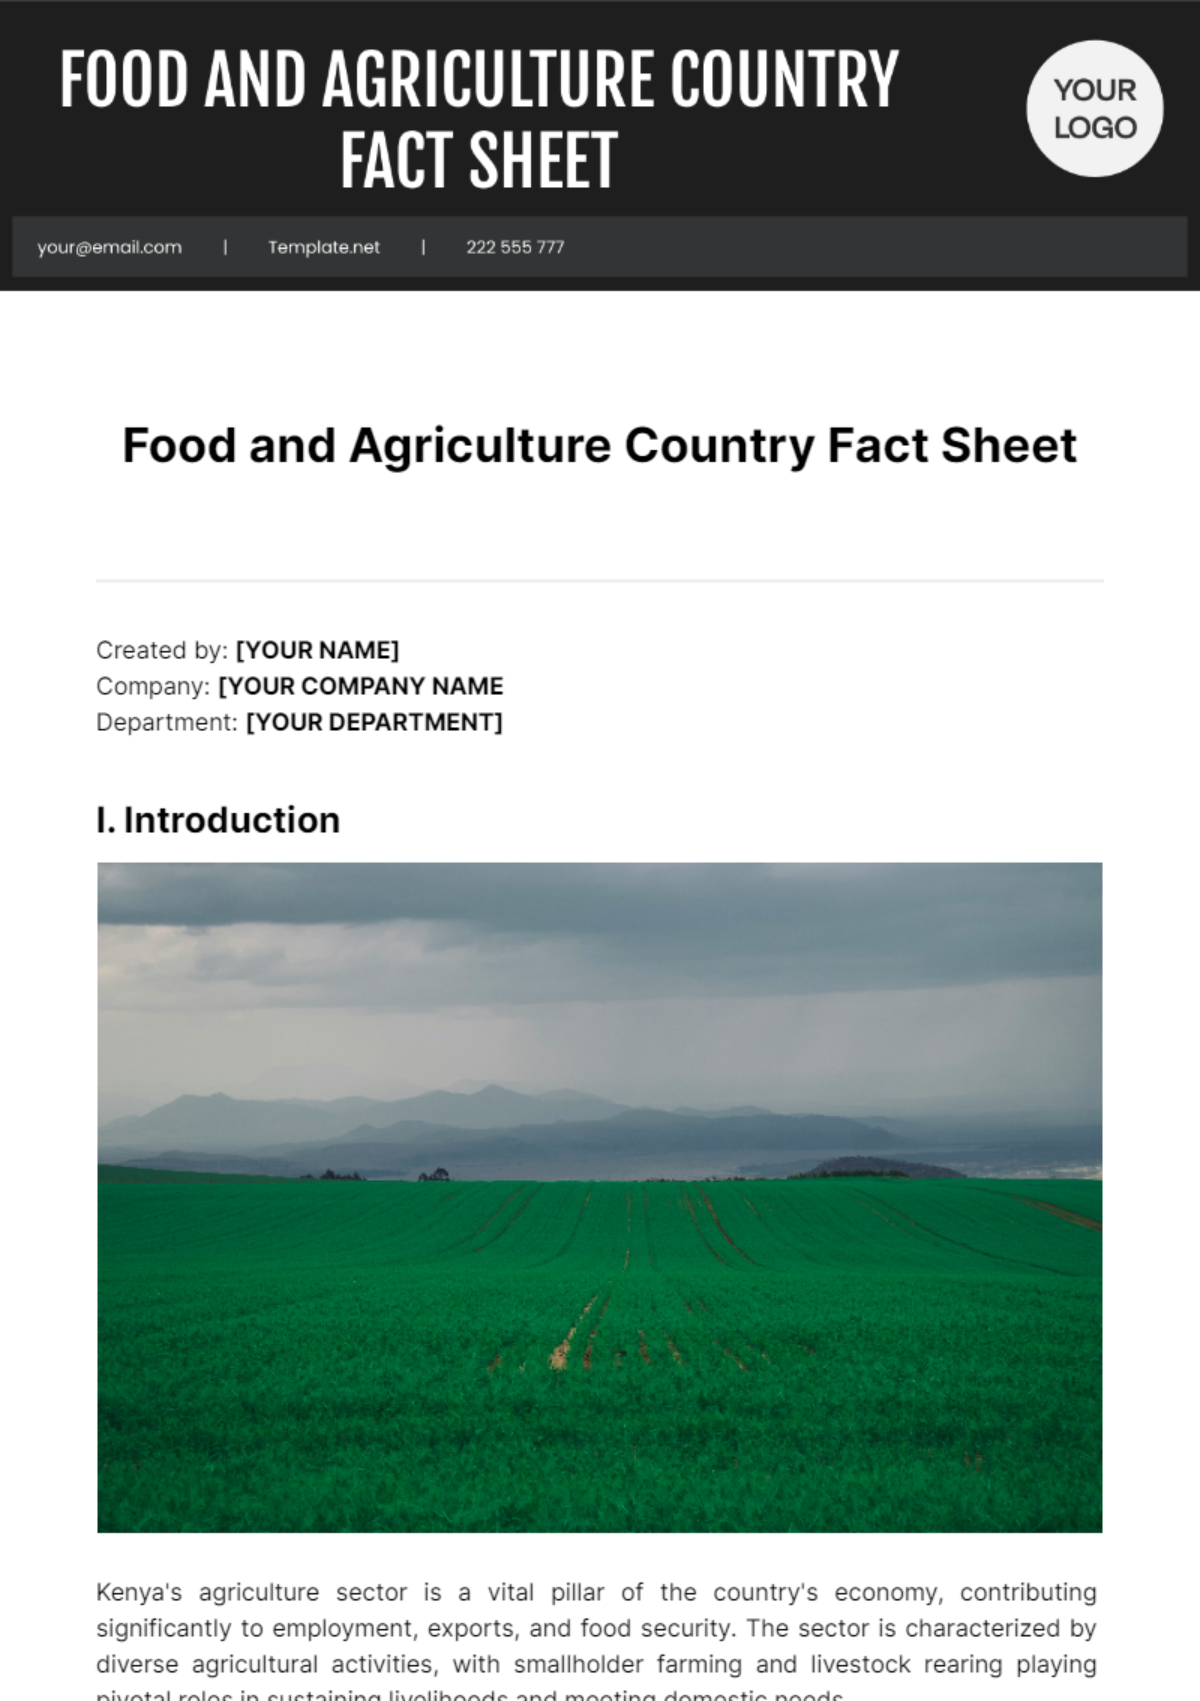 Free Food And Agriculture Country Fact Sheet Template